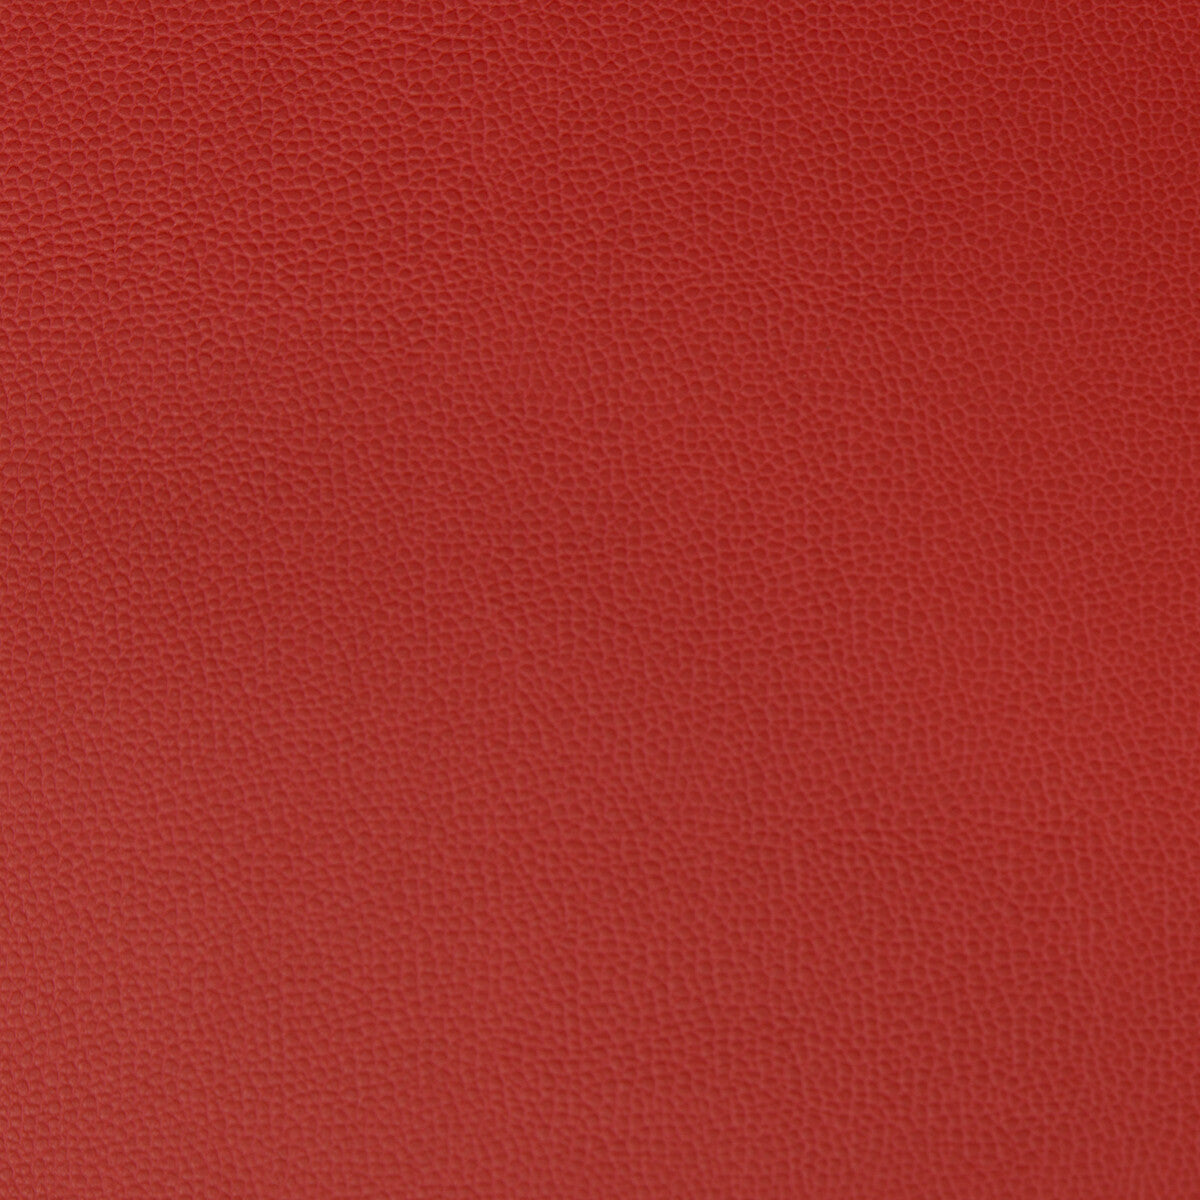 Lenox fabric in chilipepper color - pattern LENOX.919.0 - by Kravet Contract